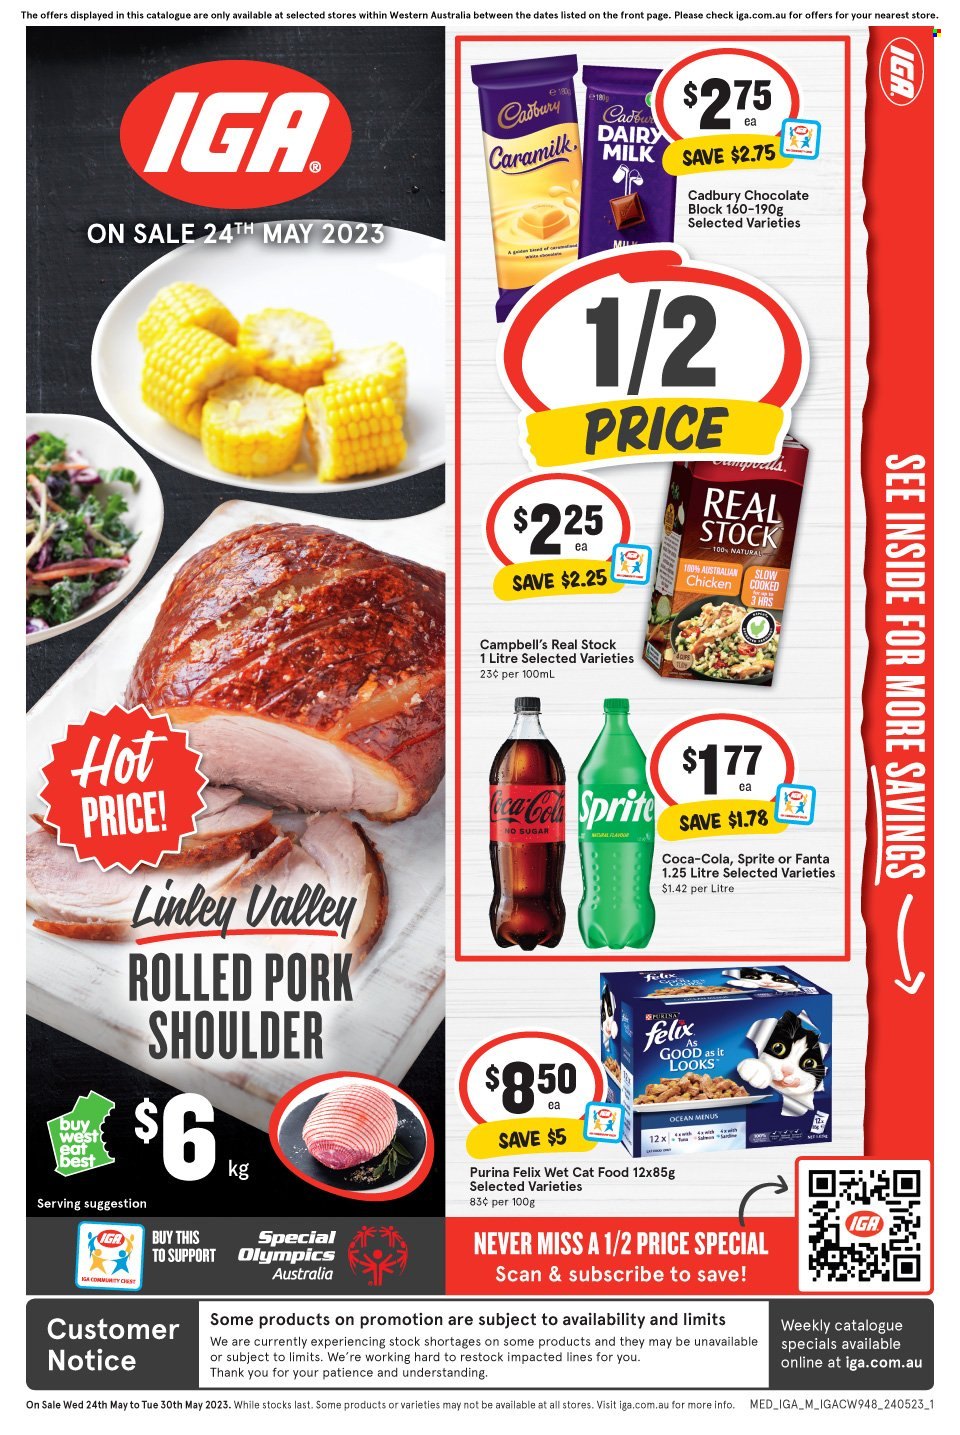 thumbnail - IGA Catalogue - 24 May 2023 - 30 May 2023 - Sales products - Campbell's, chocolate, Cadbury, Dairy Milk, Coca-Cola, Sprite, Fanta, soft drink, chicken, pork meat, pork shoulder, animal food, cat food, Purina, Felix, wet cat food. Page 1.